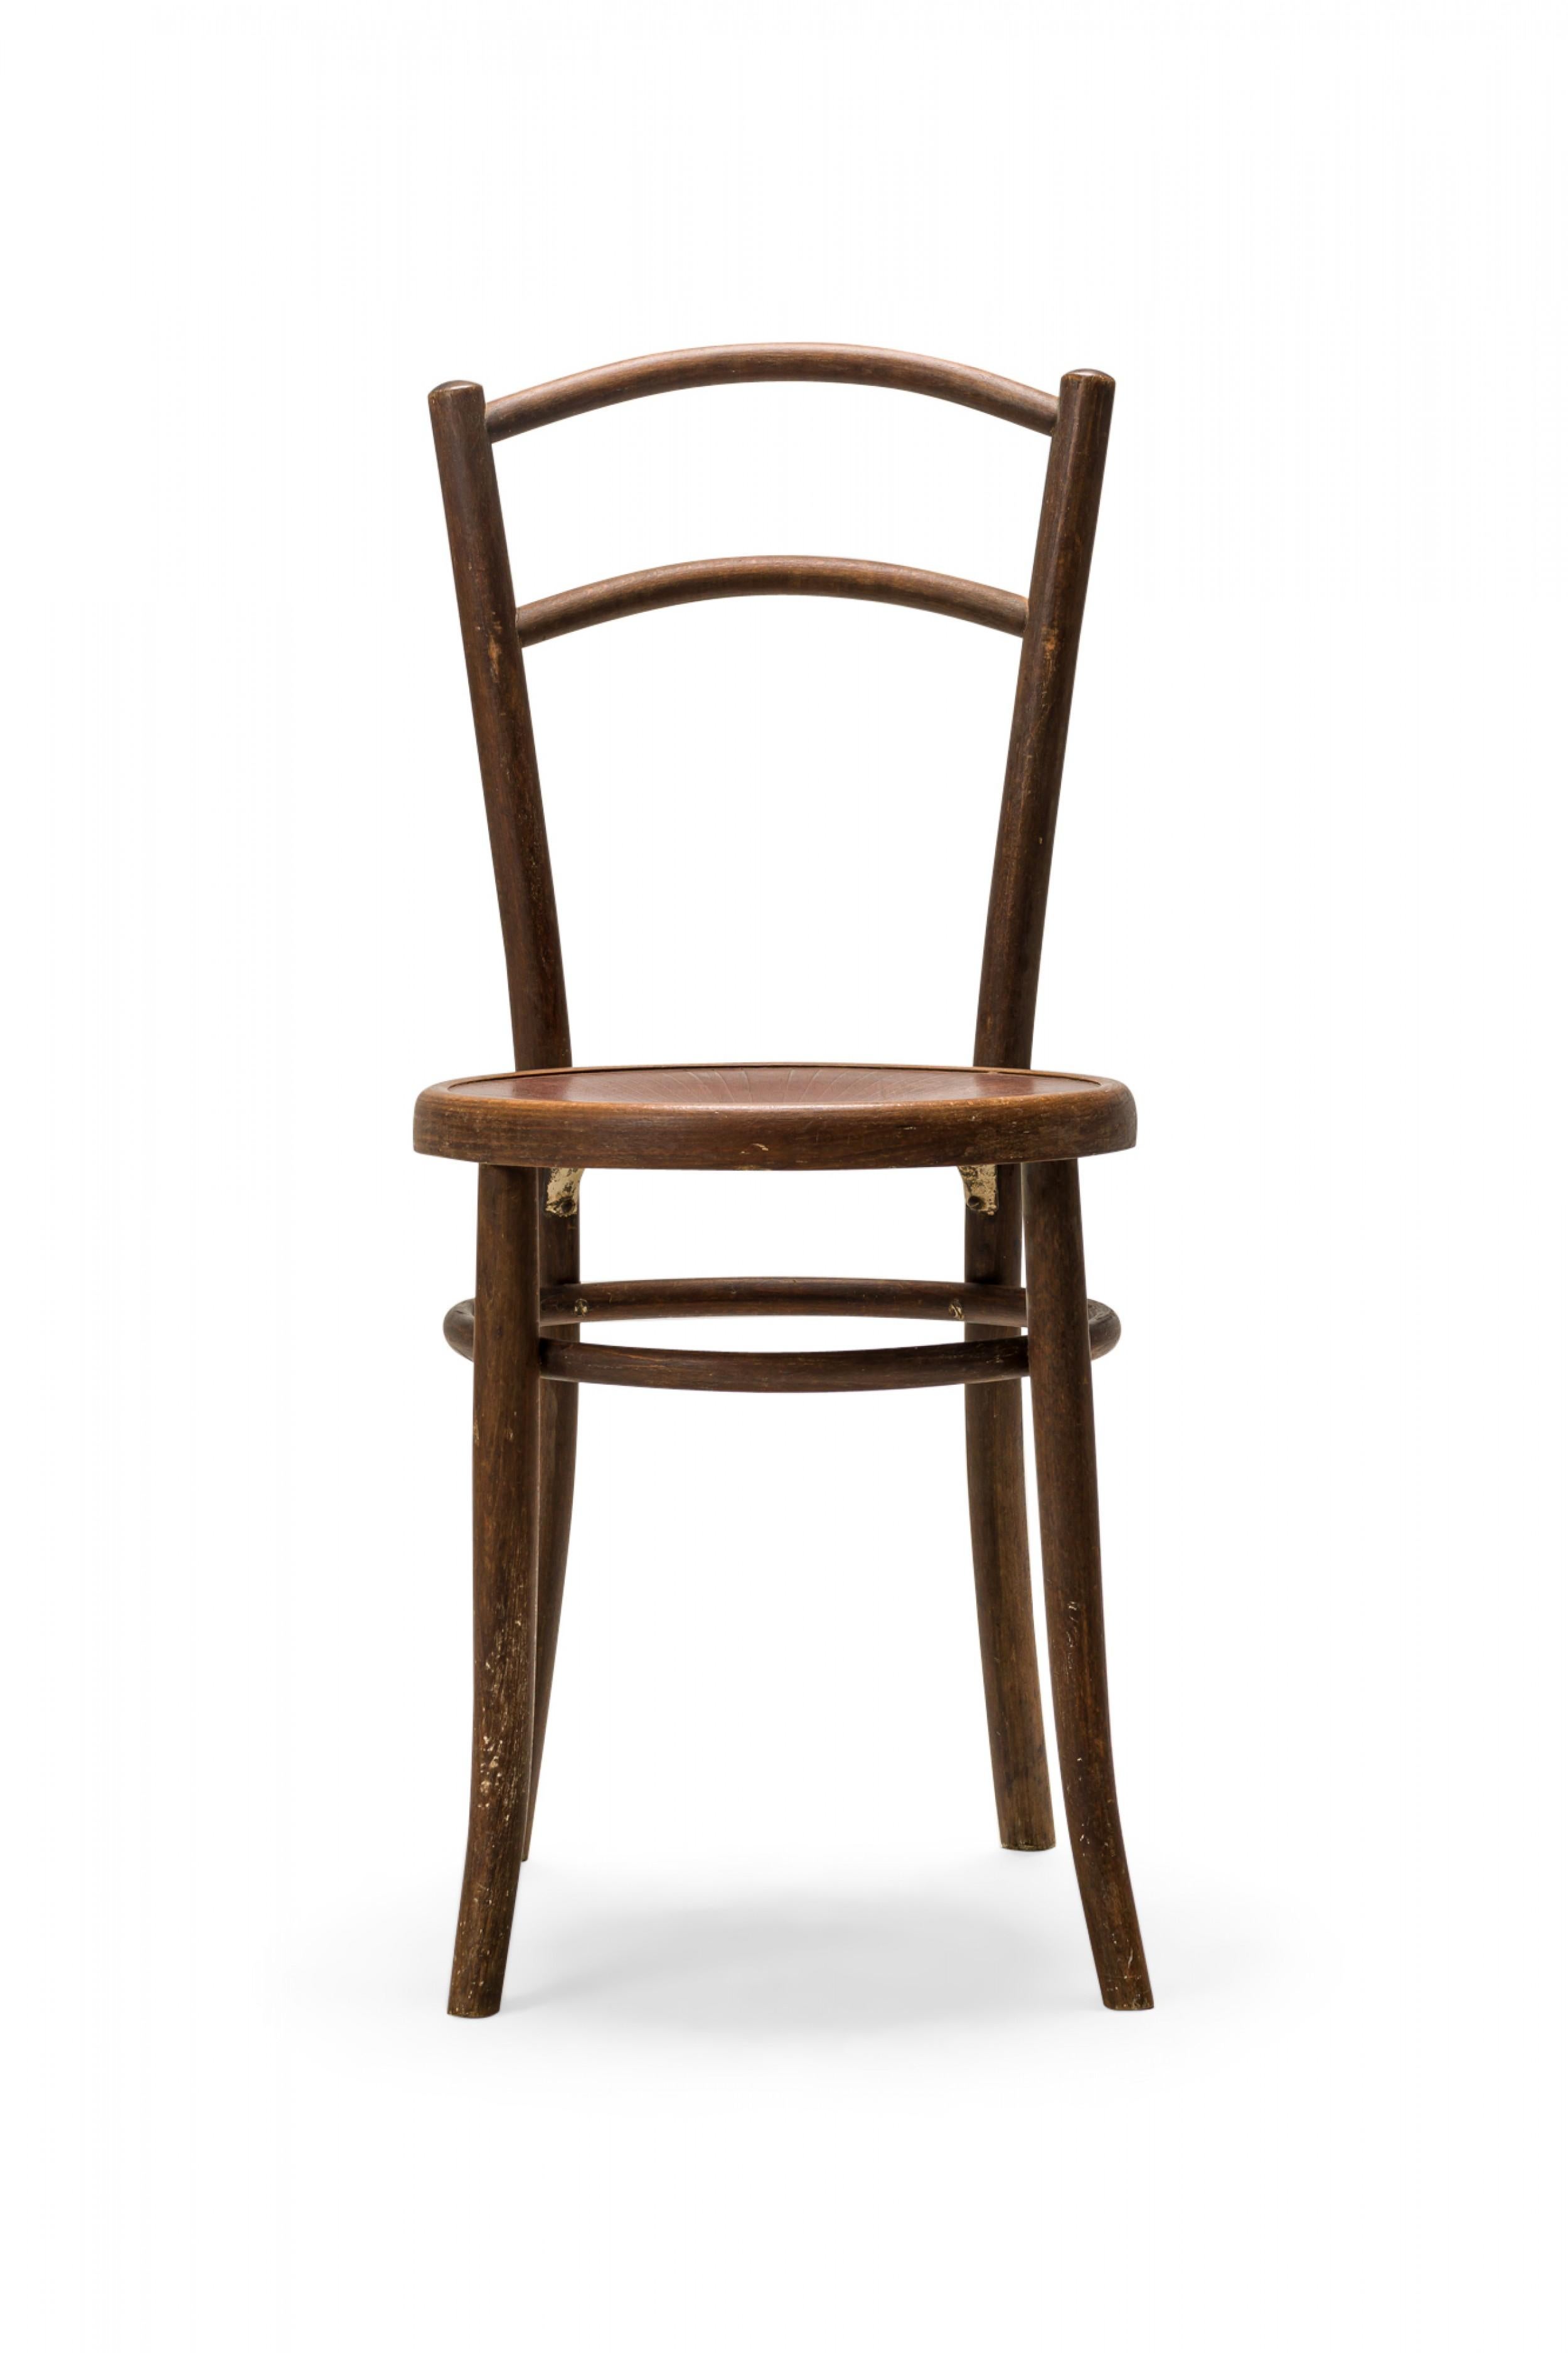 SET of 4 Thonet Bentwood cafe chairs with vertically curved back rests and circular seats. (PRICED AS SET)
